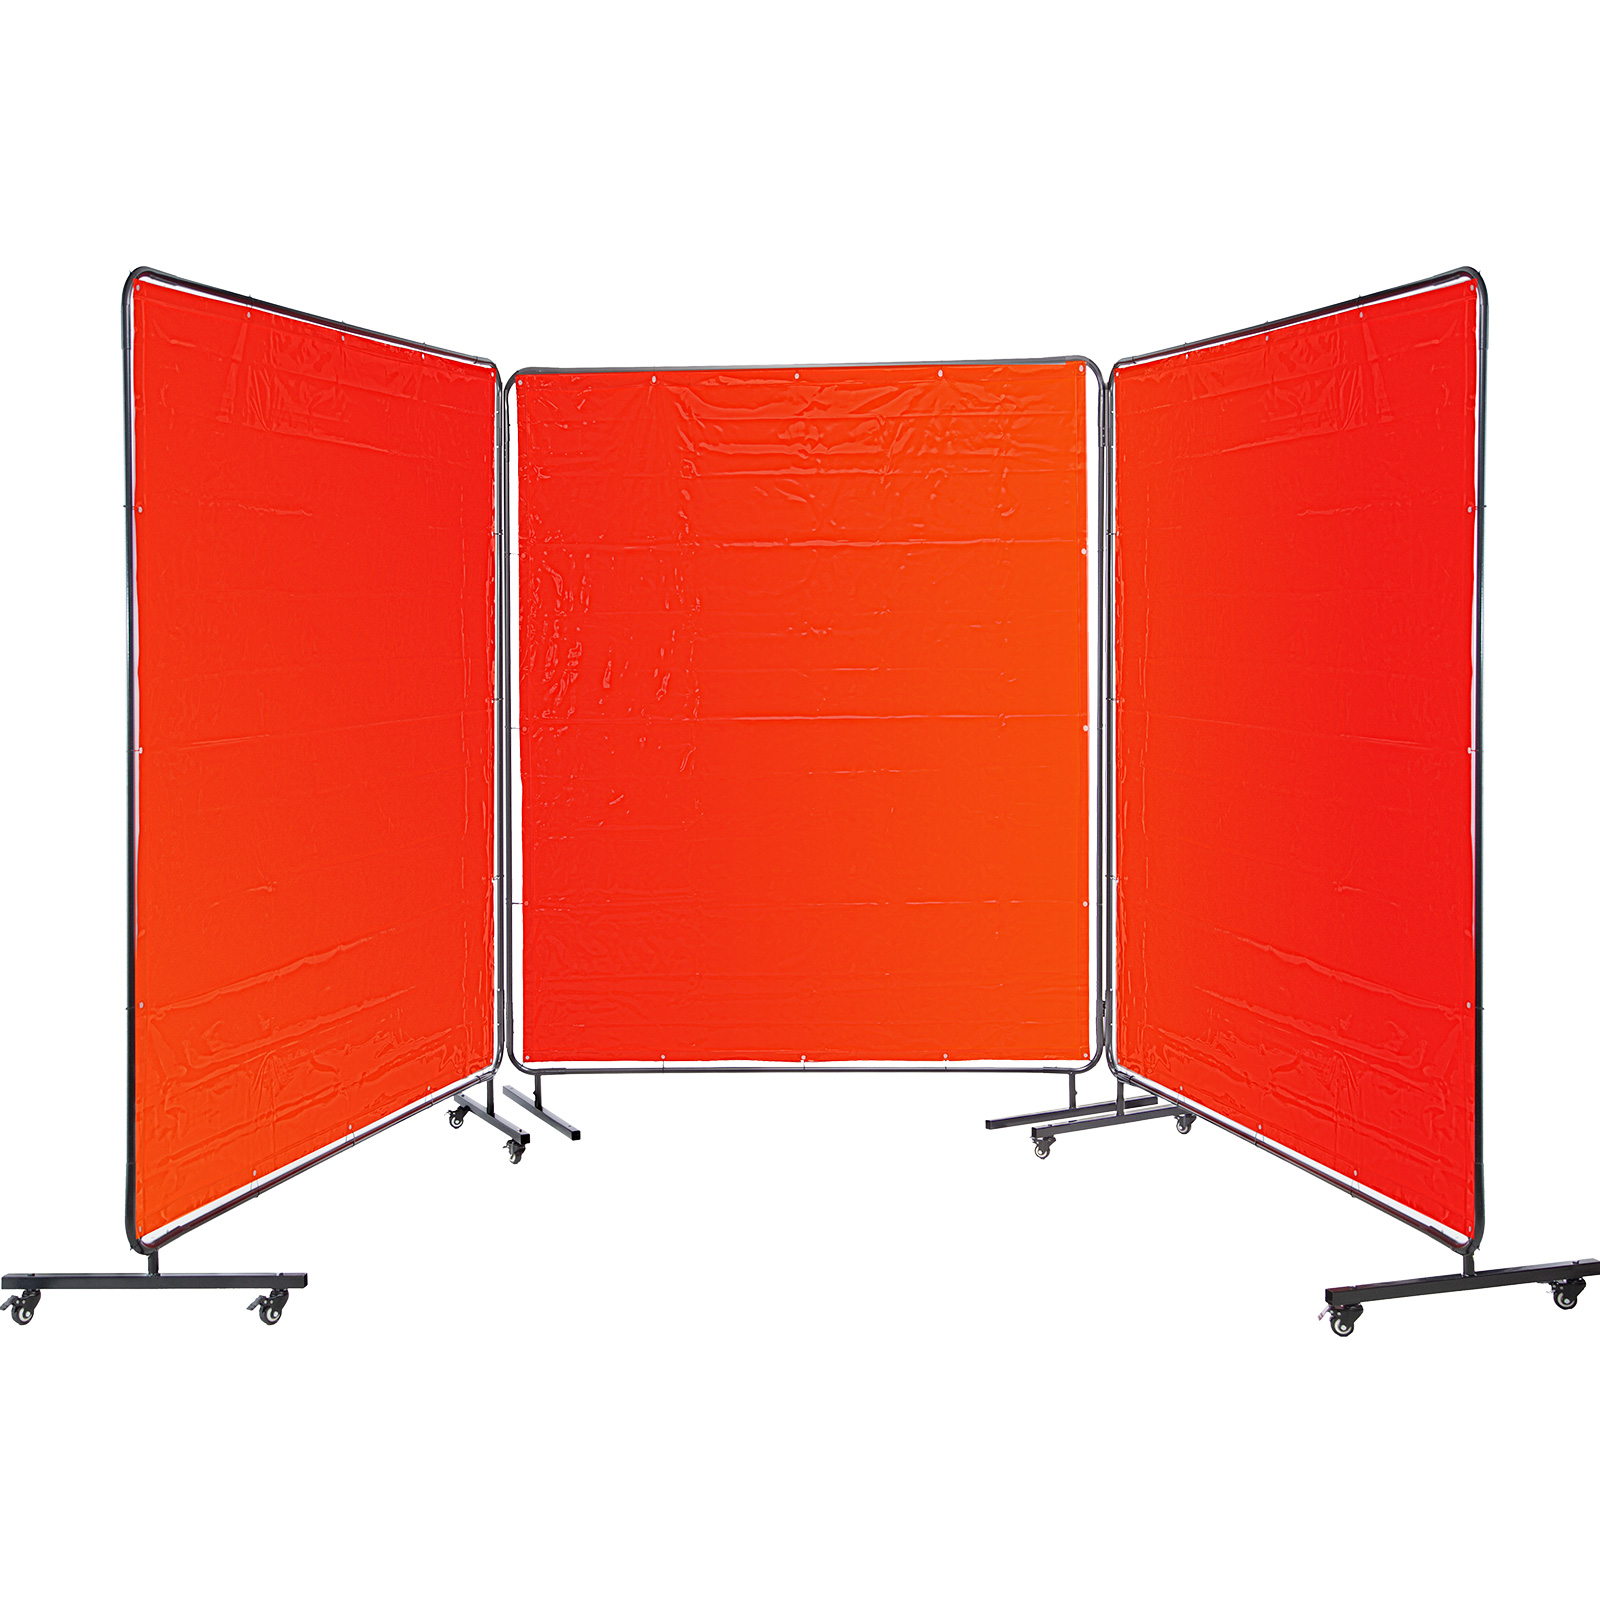 Mophorn 6 x 6 Welding Screen with Frame Red Vinyl Portable Welding Curtain with Wheels Light-Proof Welding Protection Screen Professional 